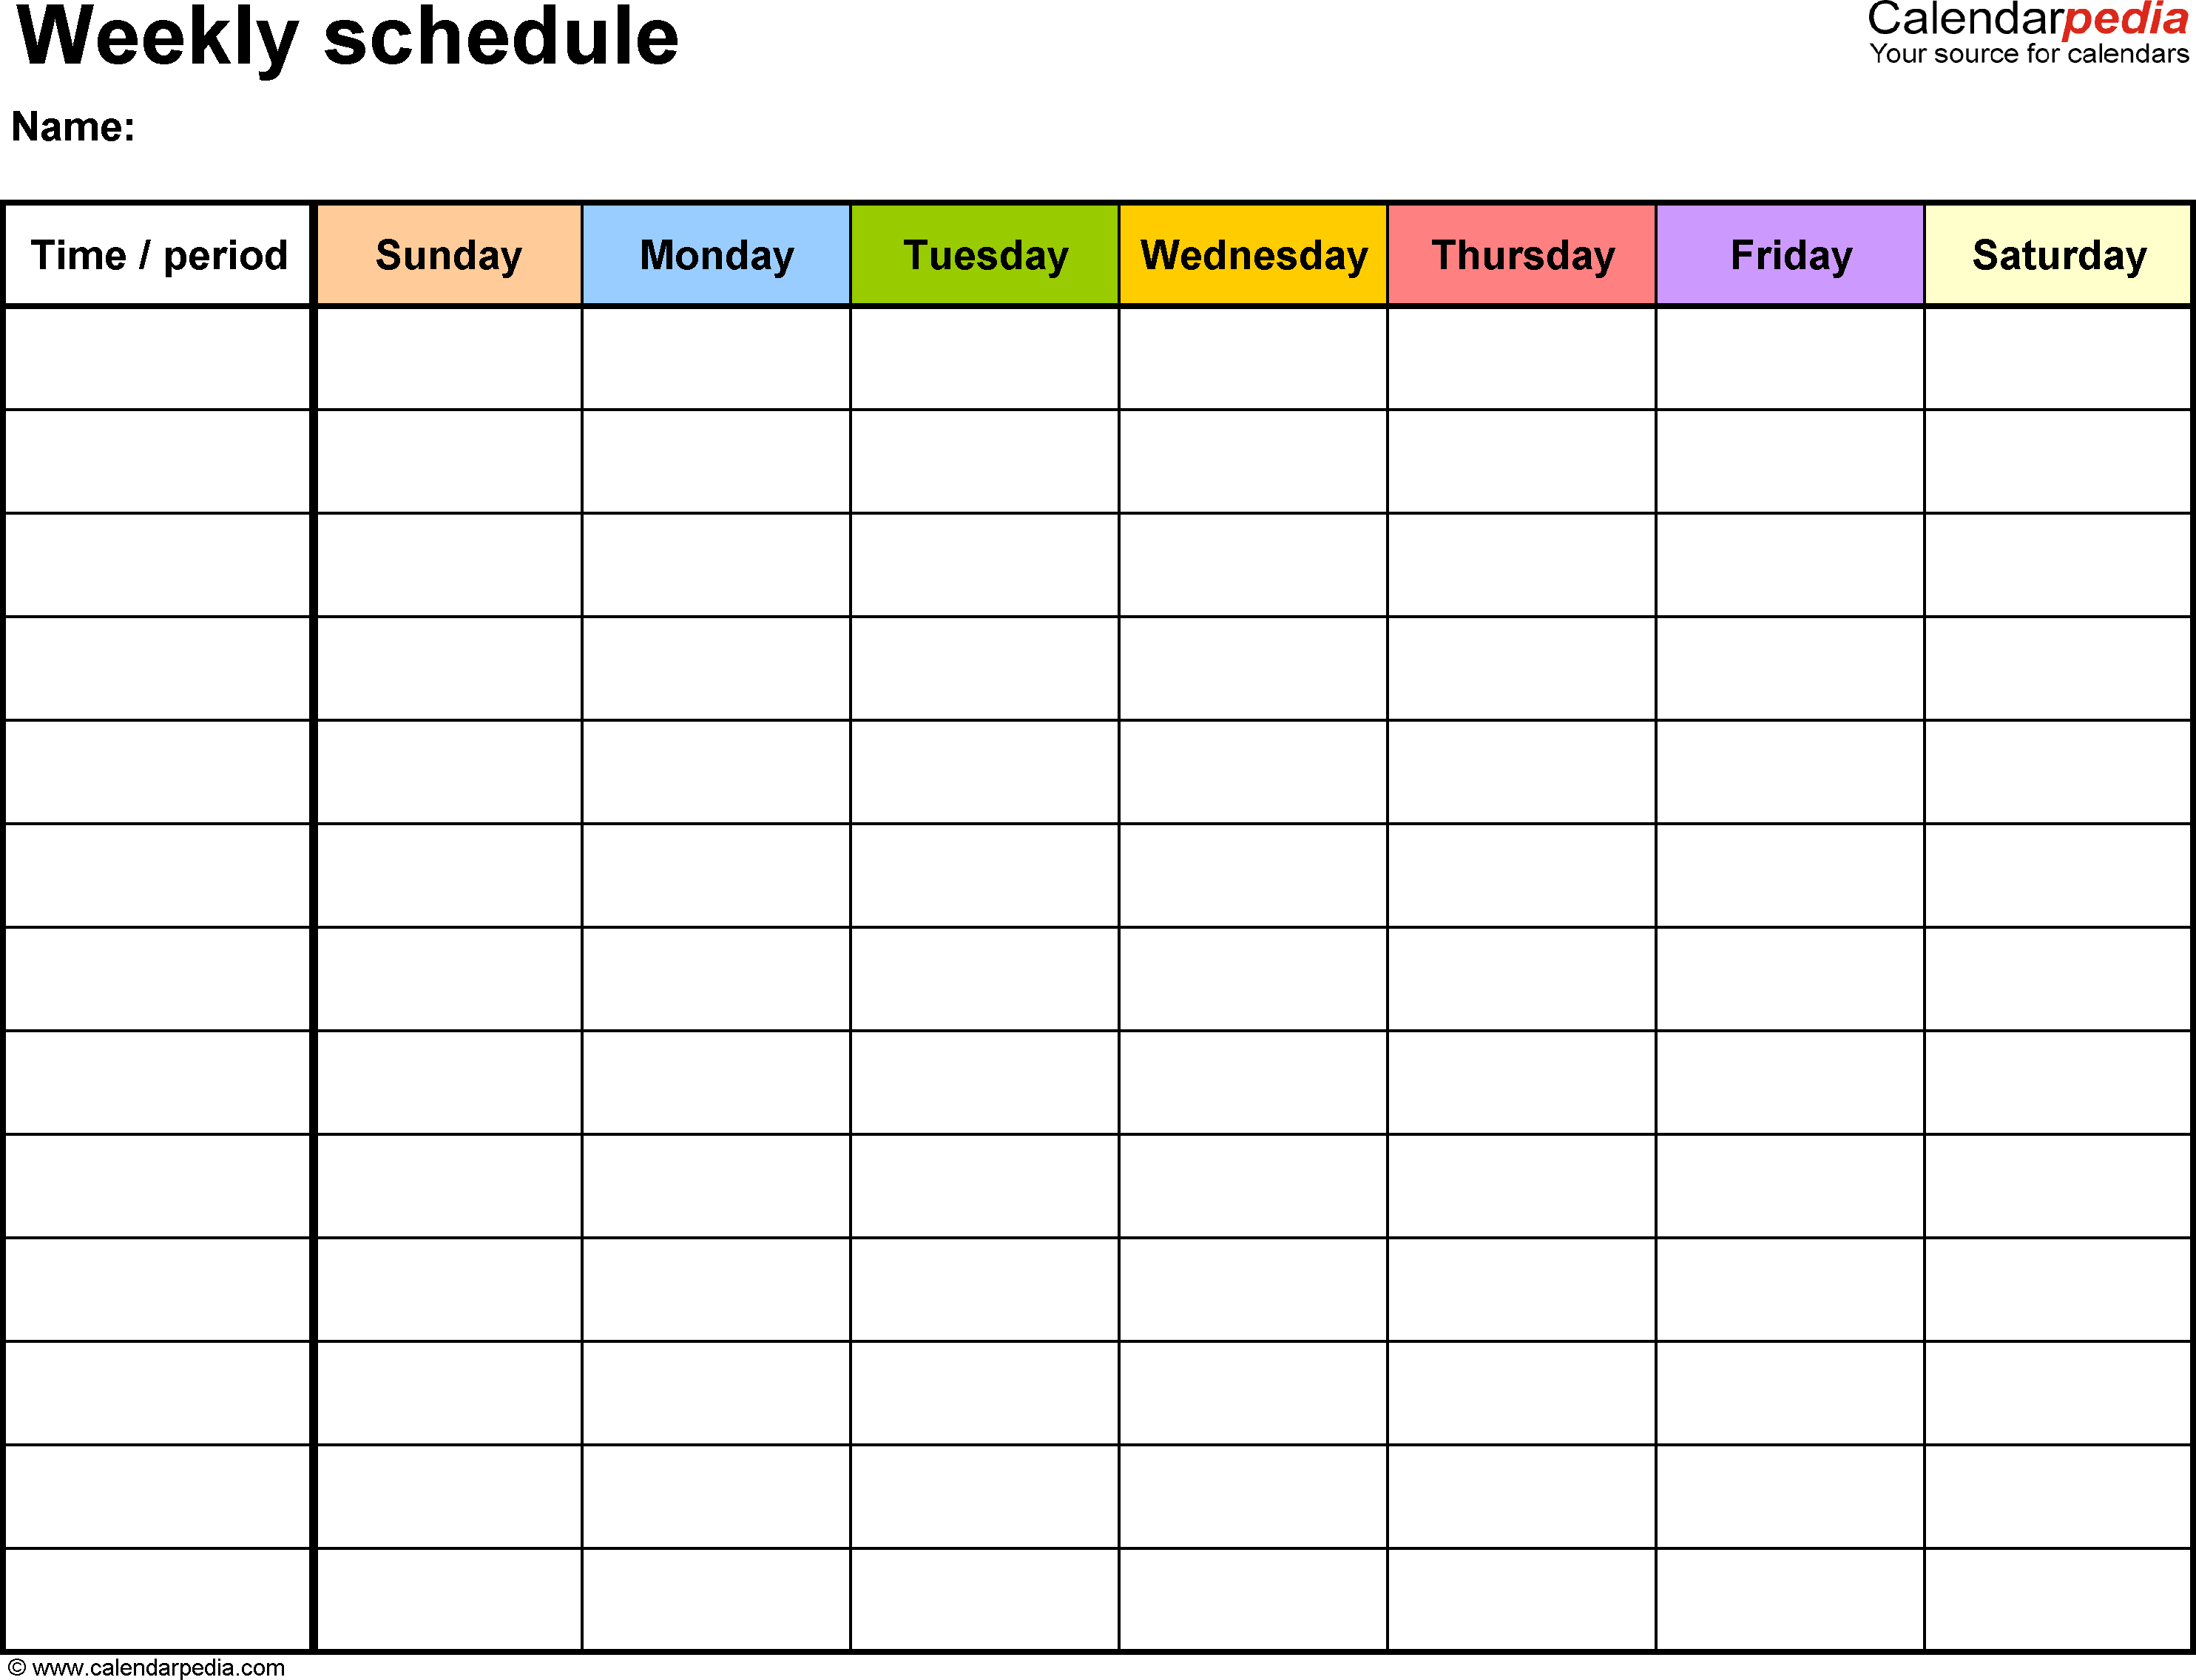 Free Weekly Schedule Templates For Excel - 18 Templates For Monthly Work Schedule Template Excel